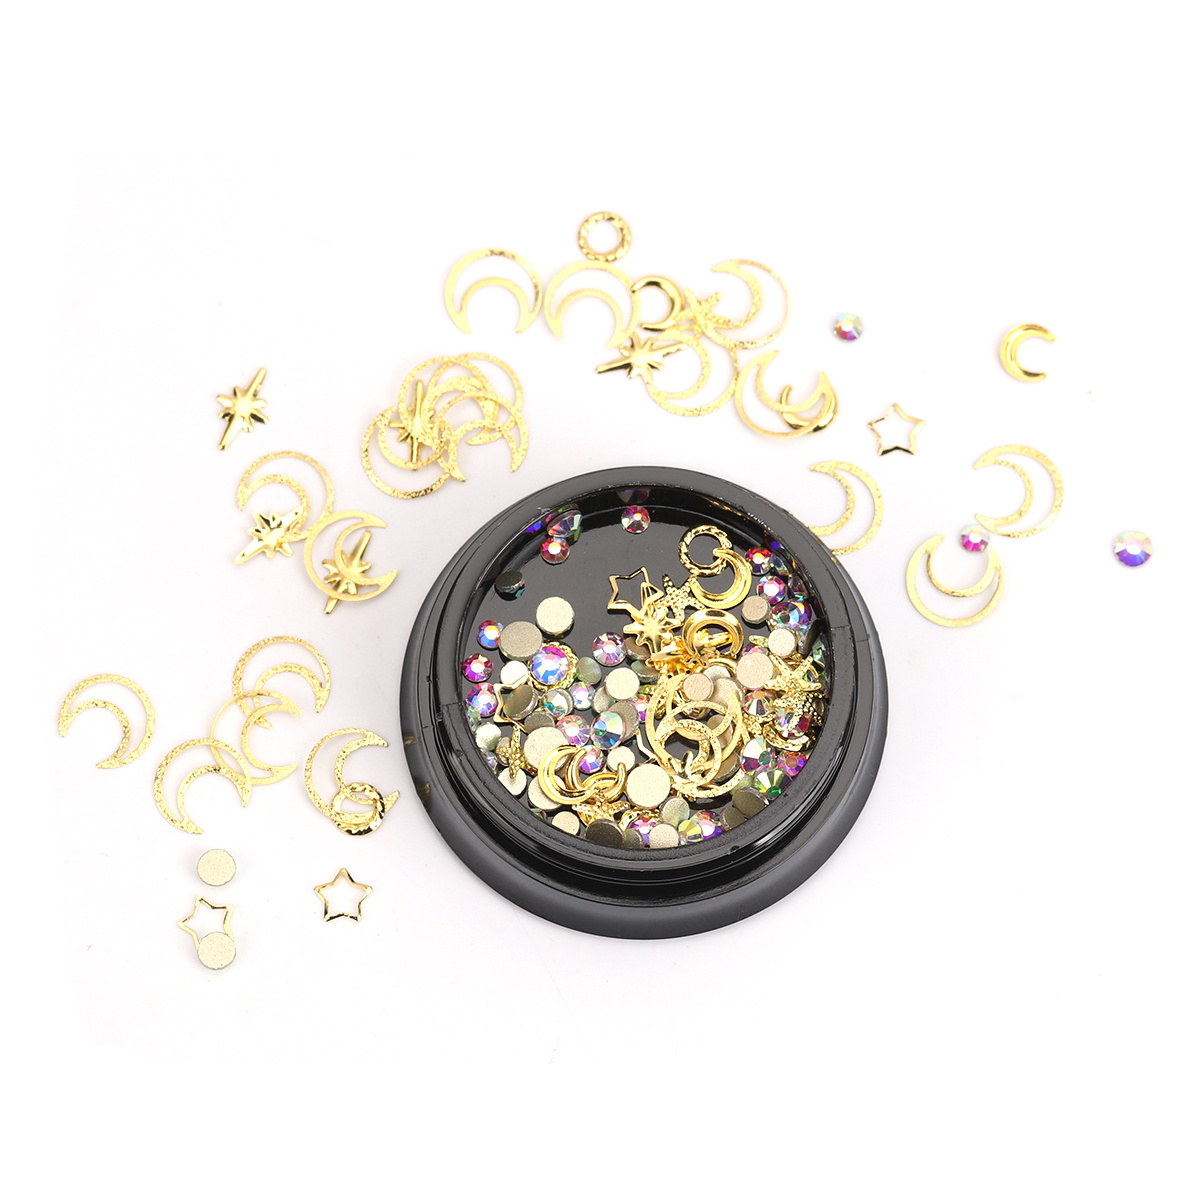 Picture of Zinc Metal Alloy & Rhinestone Resin Jewelry Craft Filling Material Gold Plated Round At Random 4cm Dia., 1 Piece